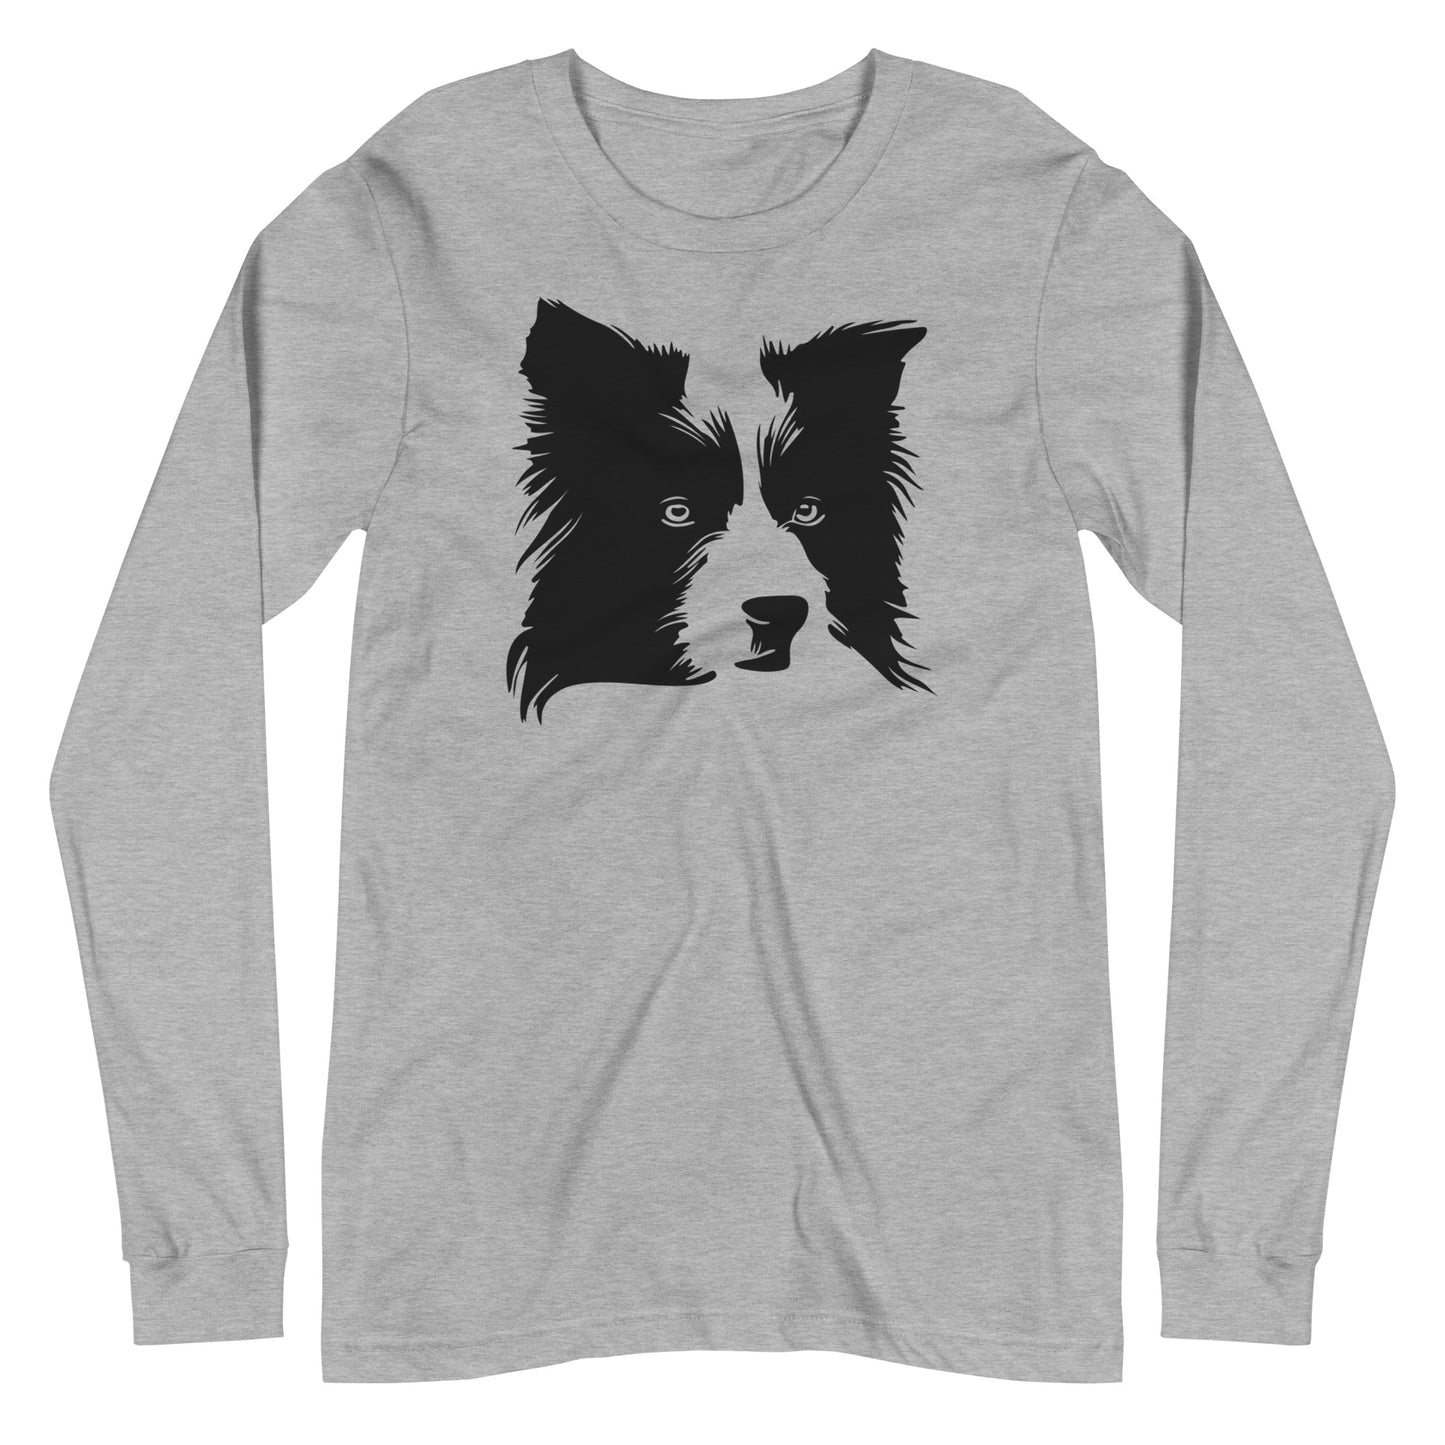 Black Border Collie face silhouette on unisex athletic heather long sleeve t-shirt